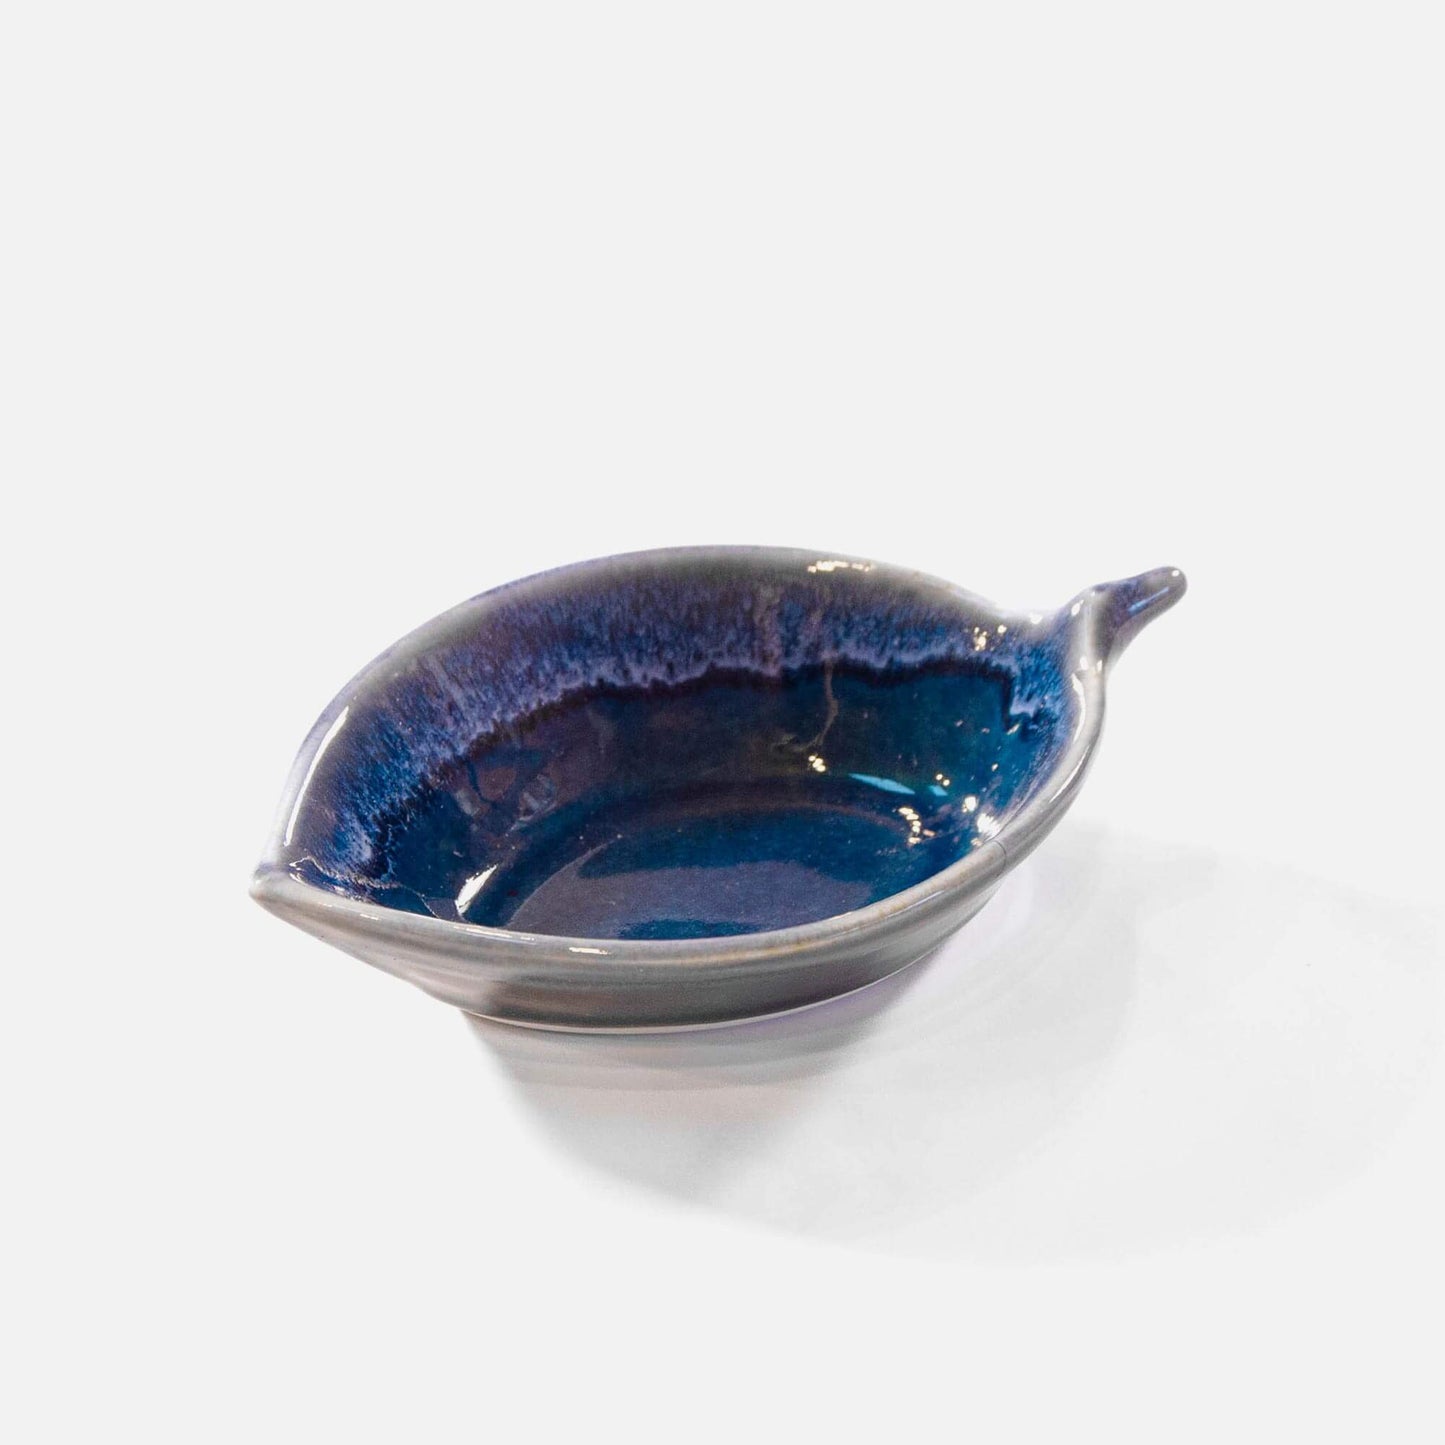 Handmade Pottery Leaf Dish in Blue made by Georgetown Pottery in Maine